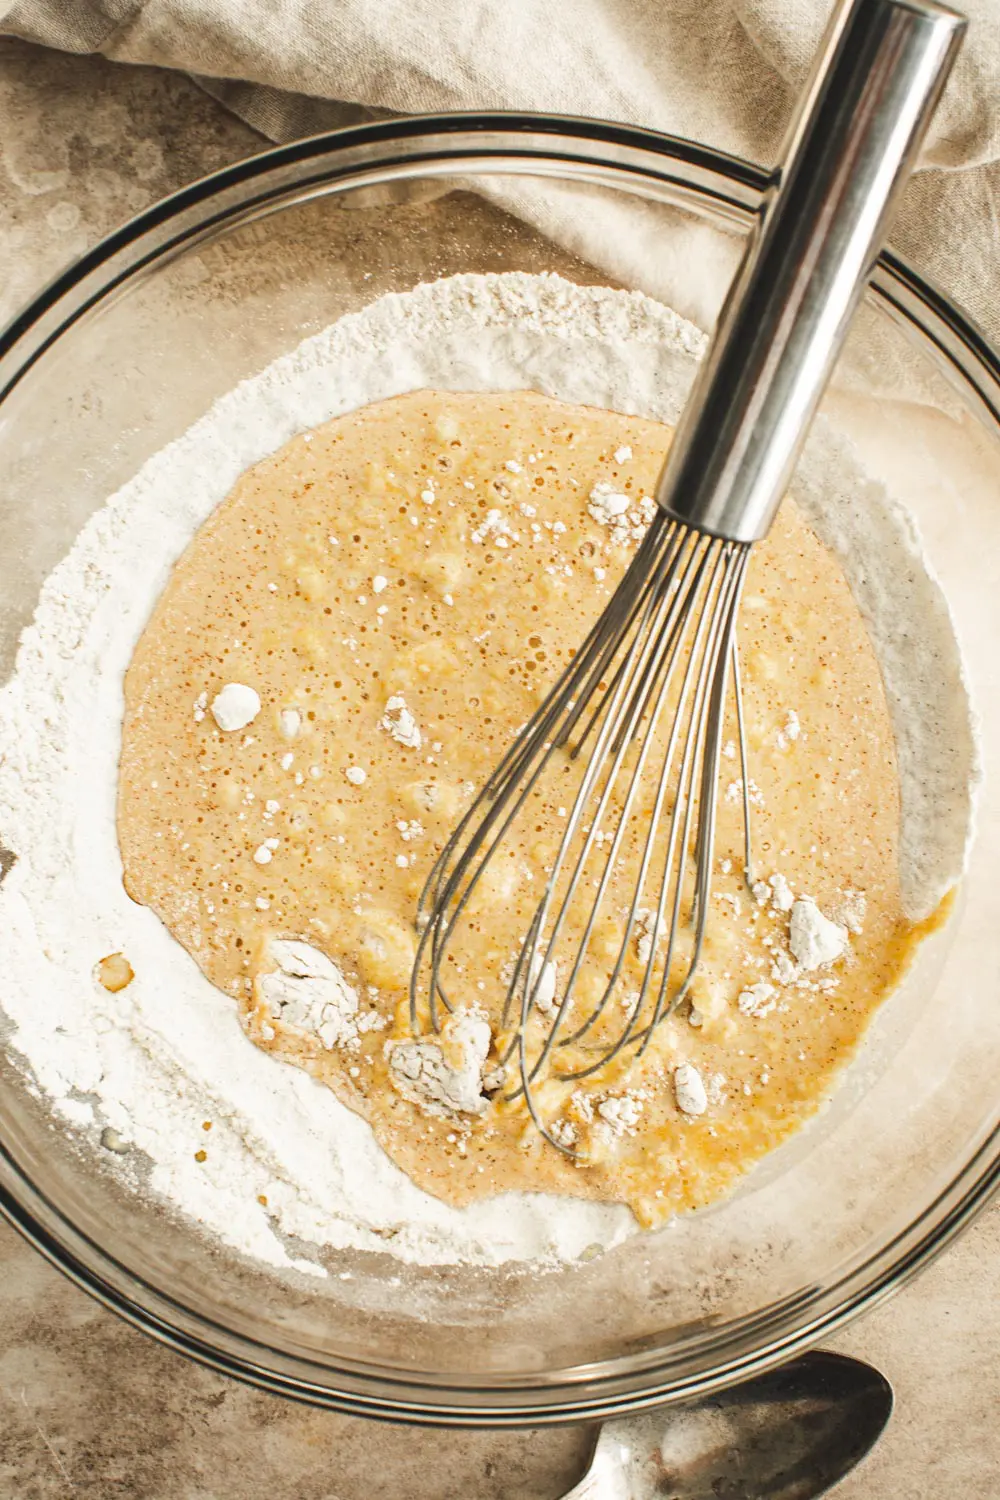 Mixing the pumpkin pancake batter together in a glass bowl.